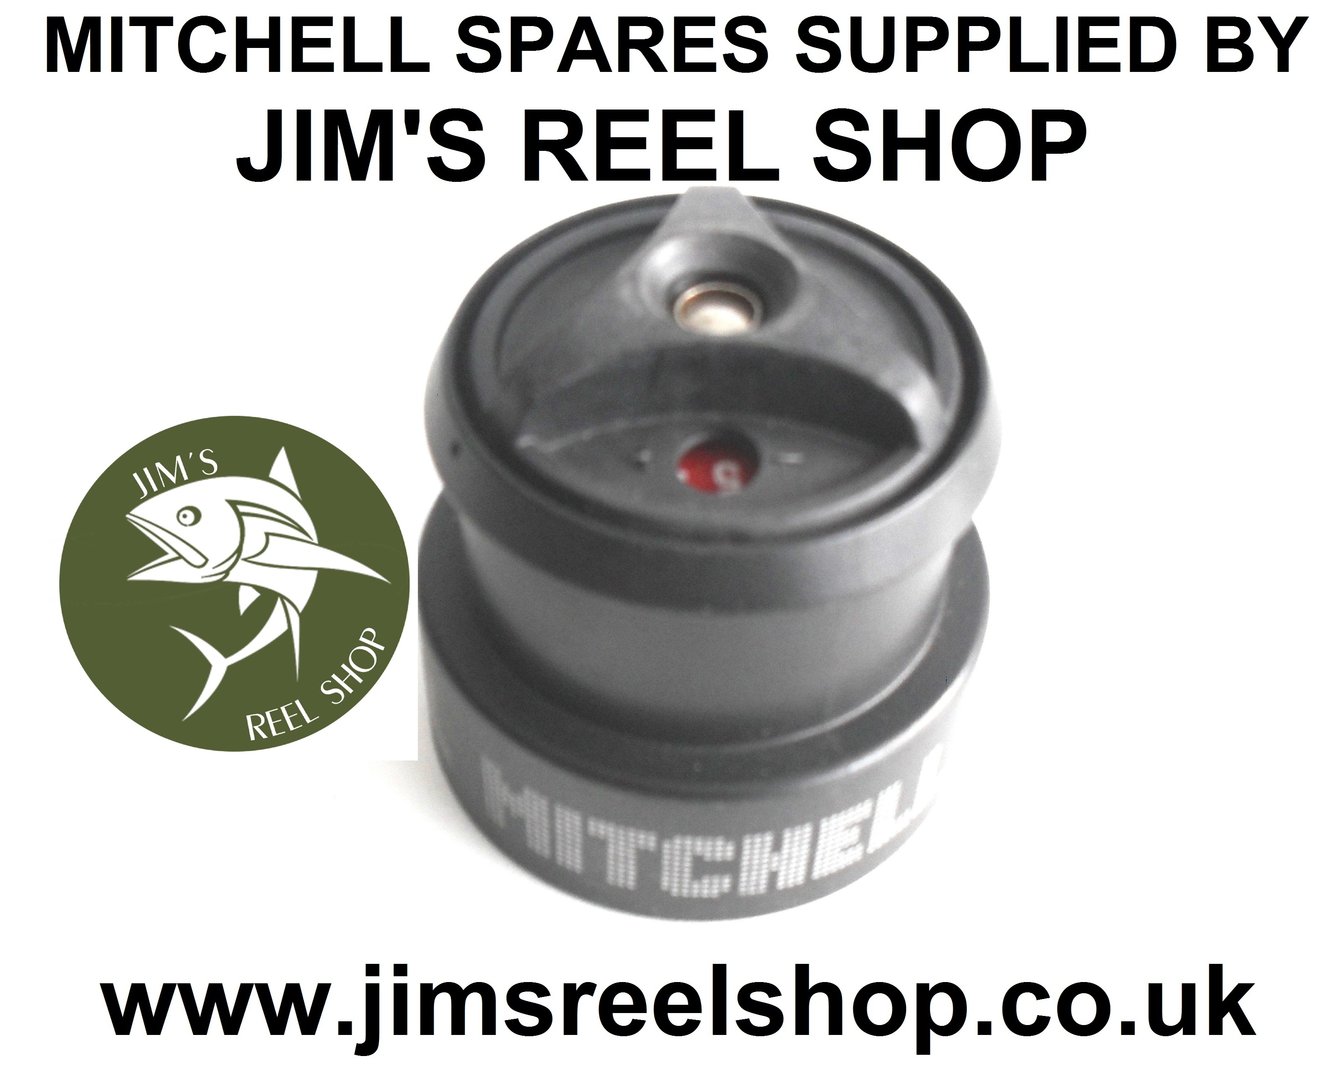 S Series ONLY! NEW MITCHELL 300S & 301S SERIES REPLACEMENT SPOOL 